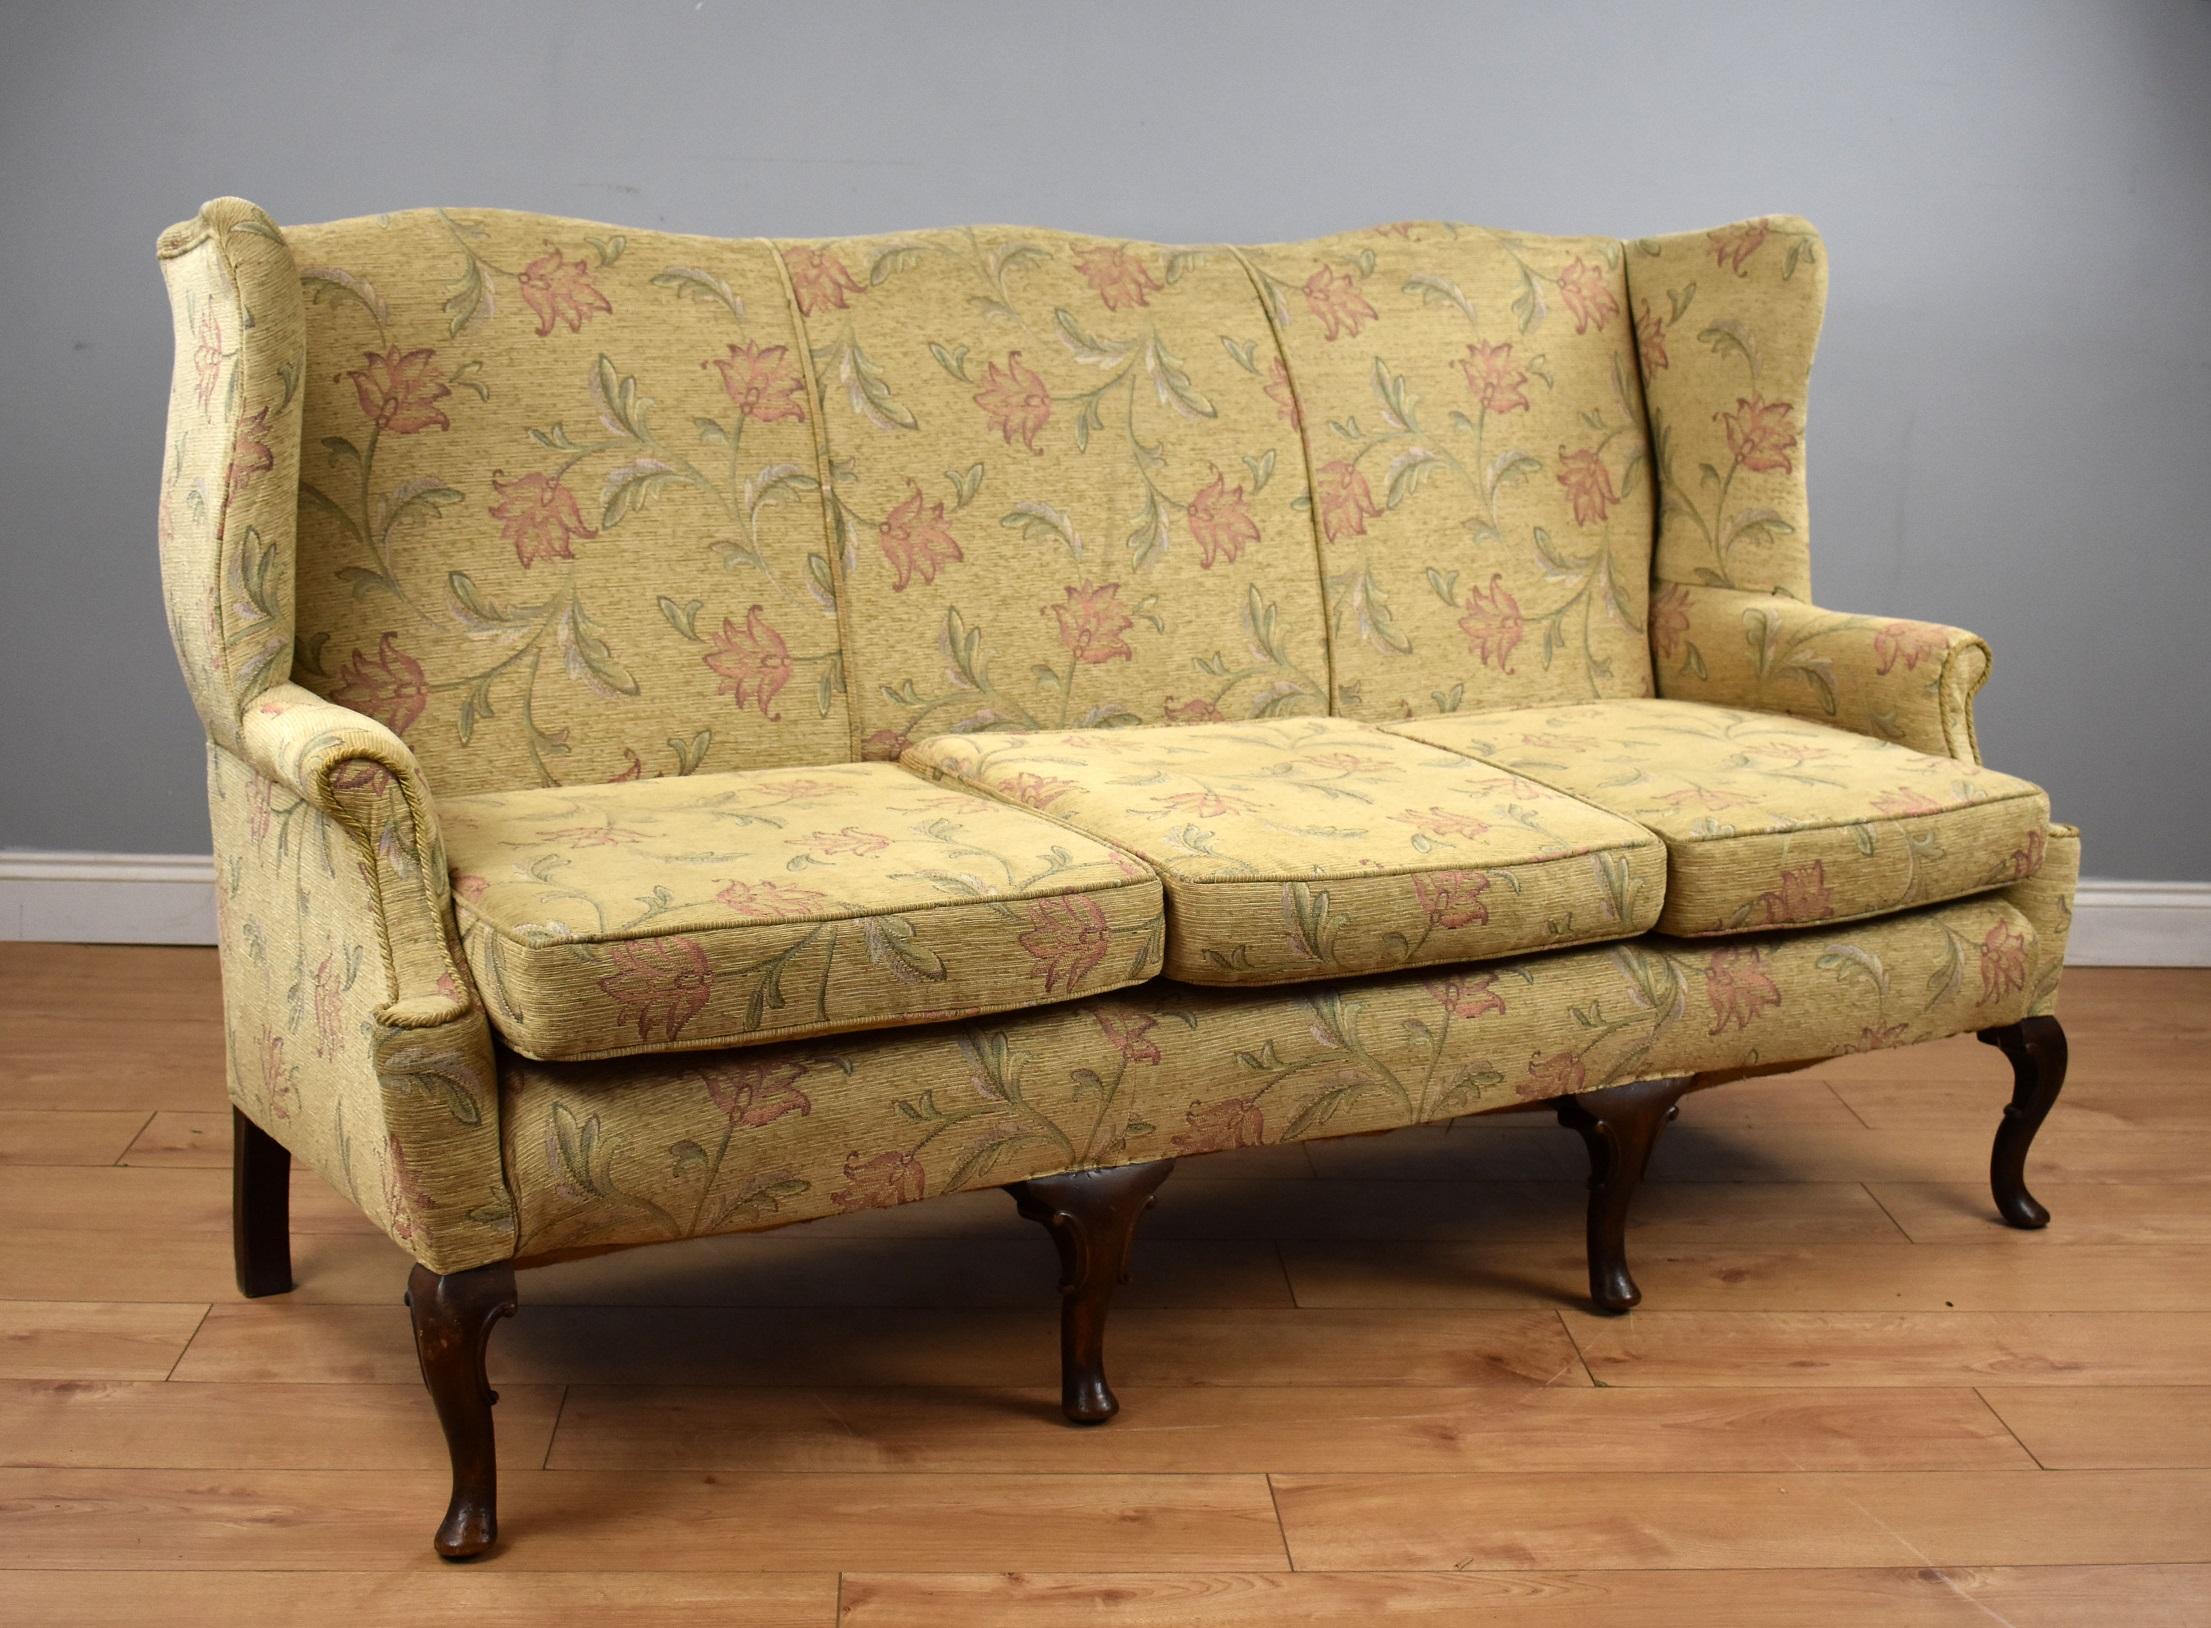 A good quality Queen Anne style wing back sofa, having three seats, above carved and shaped cabriole legs. This piece remains structurally sound and the fabric is in very good condition, showing only light wear to the feet. 

Measures: Width: 72